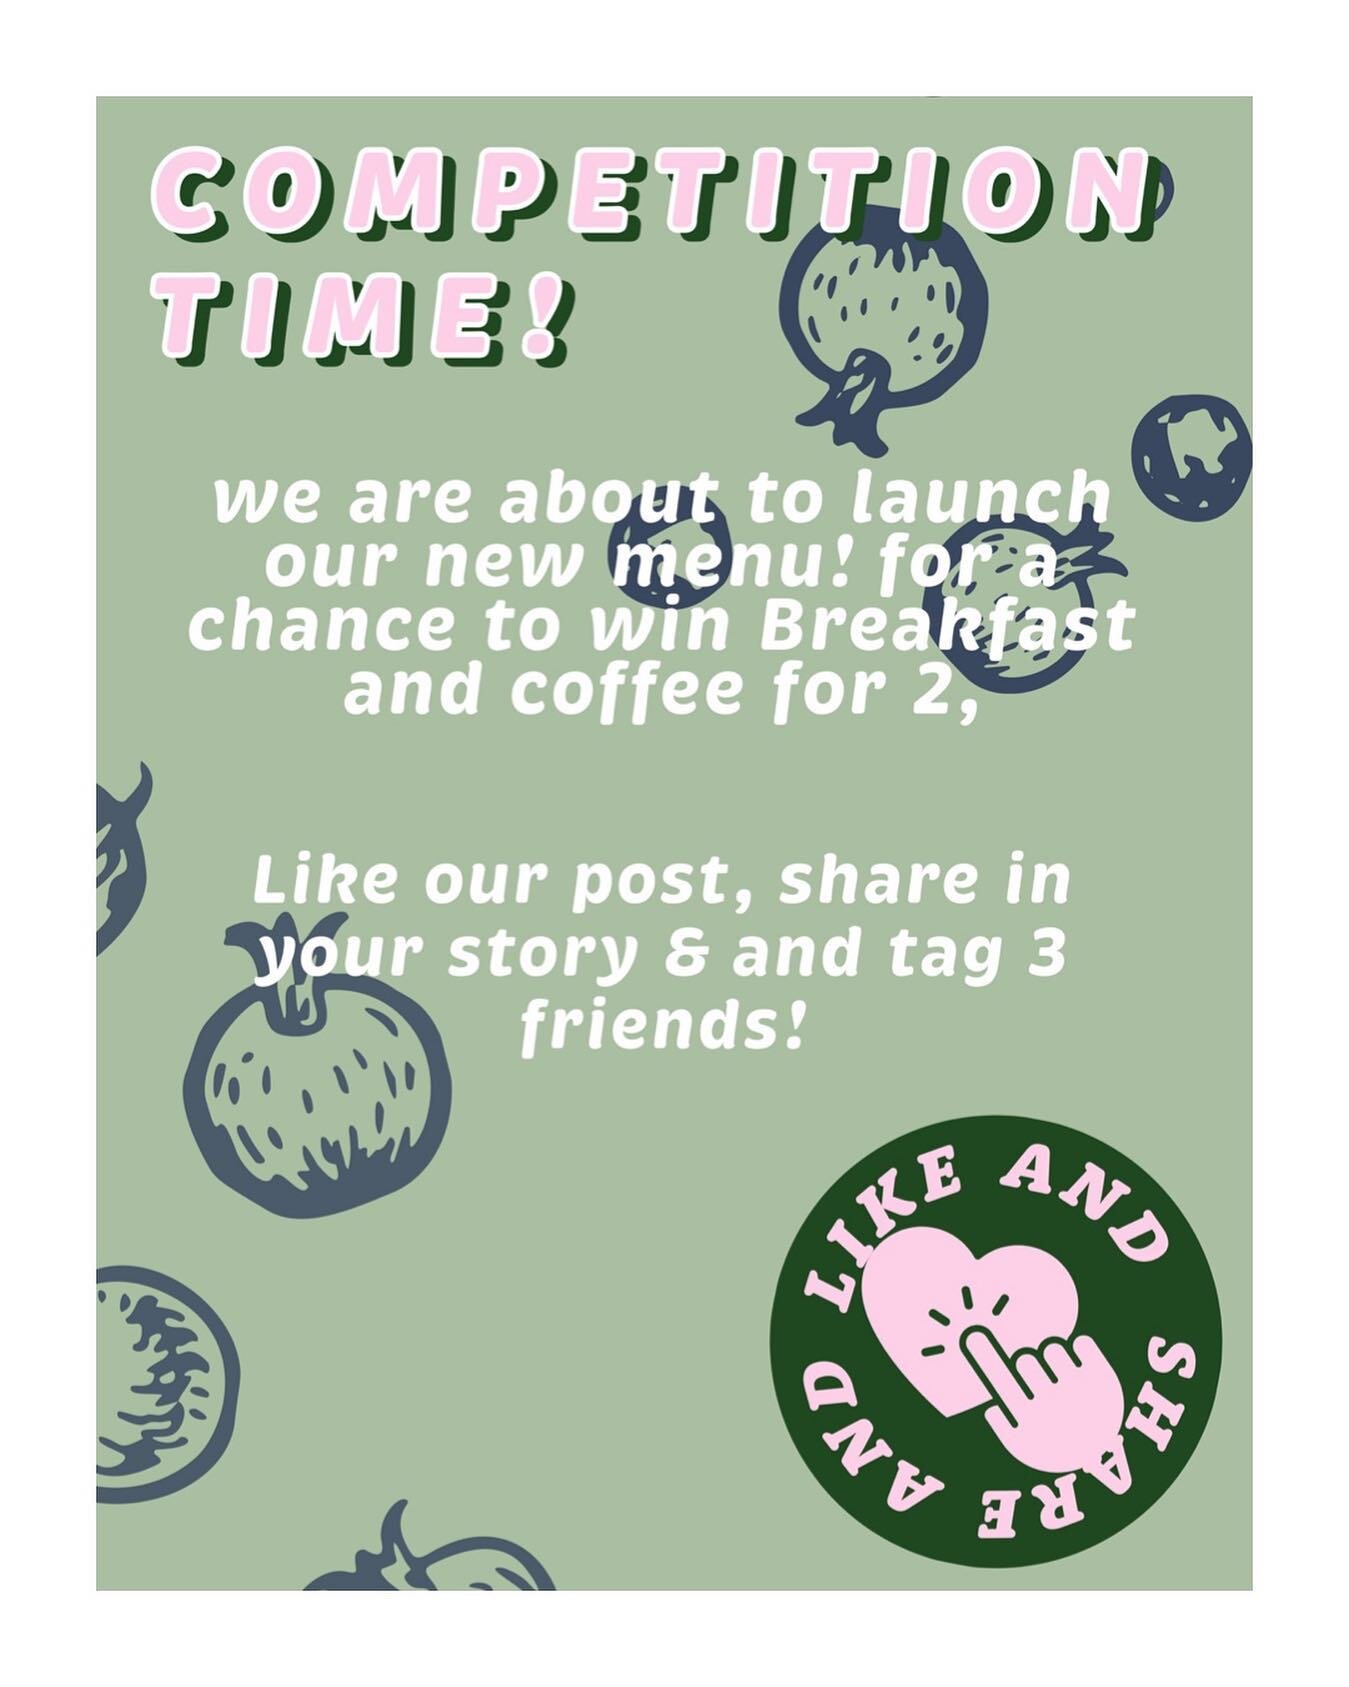 Like, share and tag 3 friends for a chance to win breakfast and coffee for 2! Winner will be announced 10th June! 

#giveaway #competition #win #giveawayalert #giveaways #giveawaytime #free
#instagiveaway #freegiveaway #newgiveaway #epicgiveaway #bri